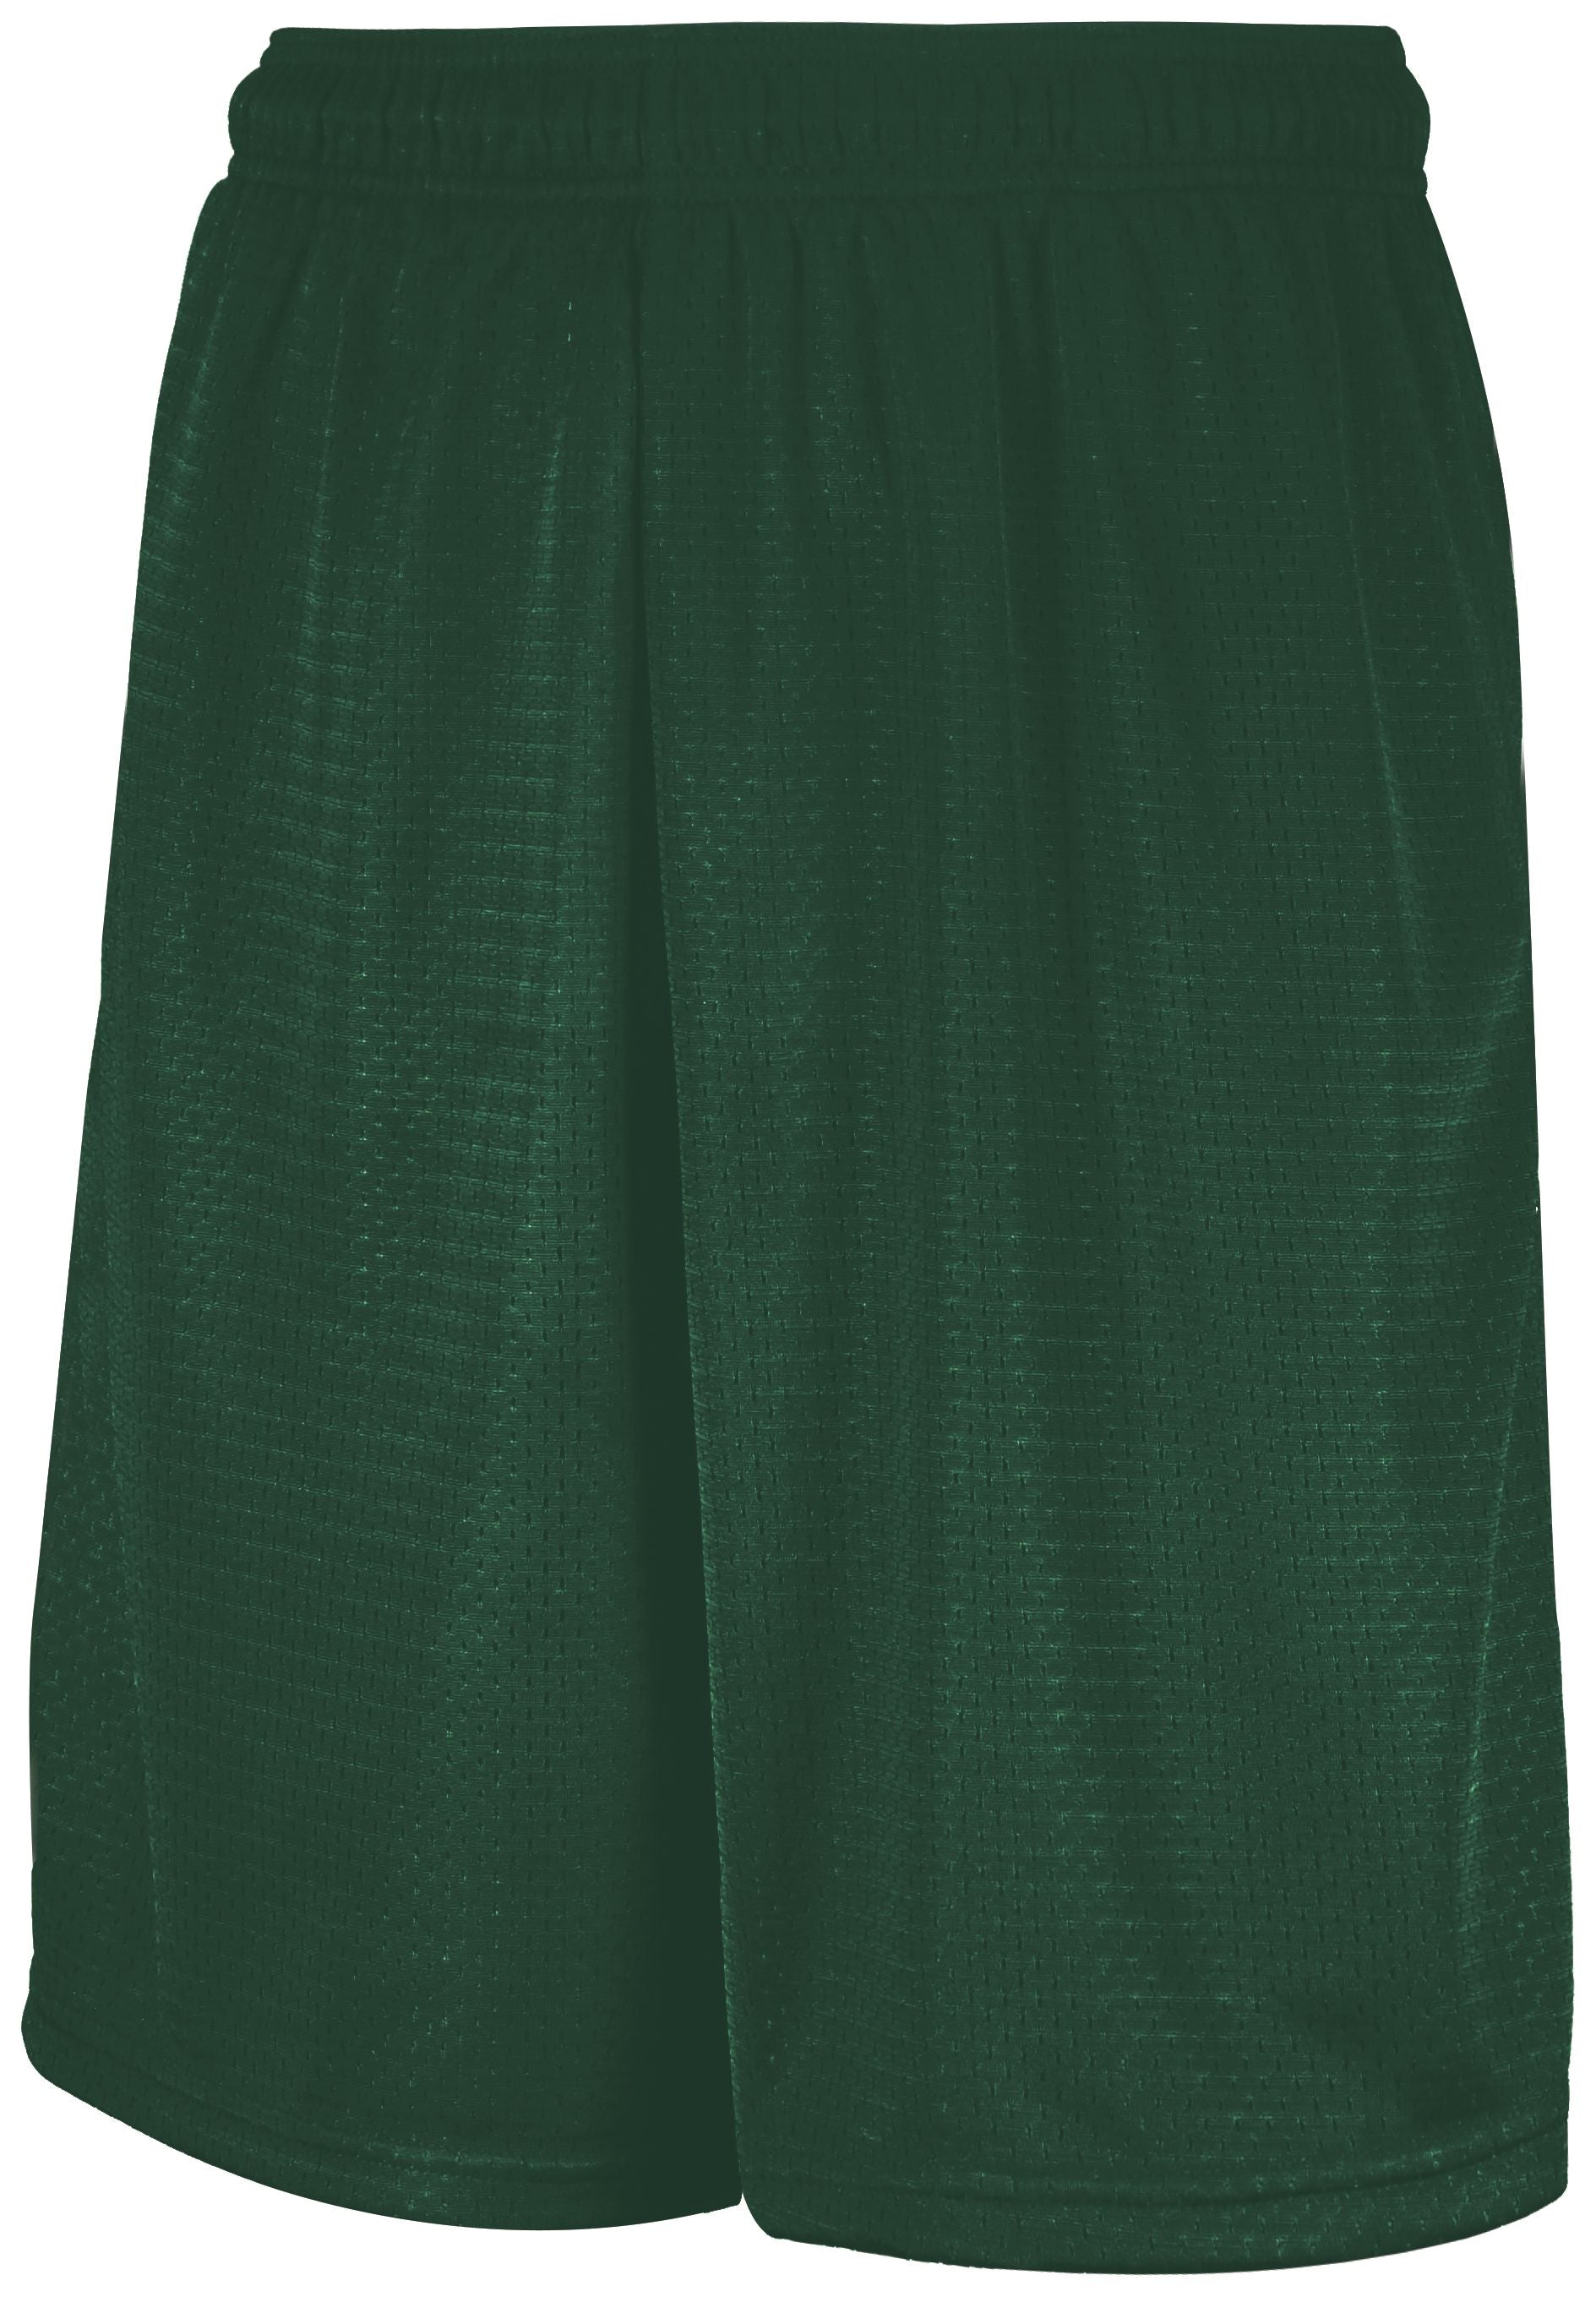 Russell Athletic Mesh Shorts With Pockets in Dark Green  -Part of the Adult, Adult-Shorts, Russell-Athletic-Products product lines at KanaleyCreations.com